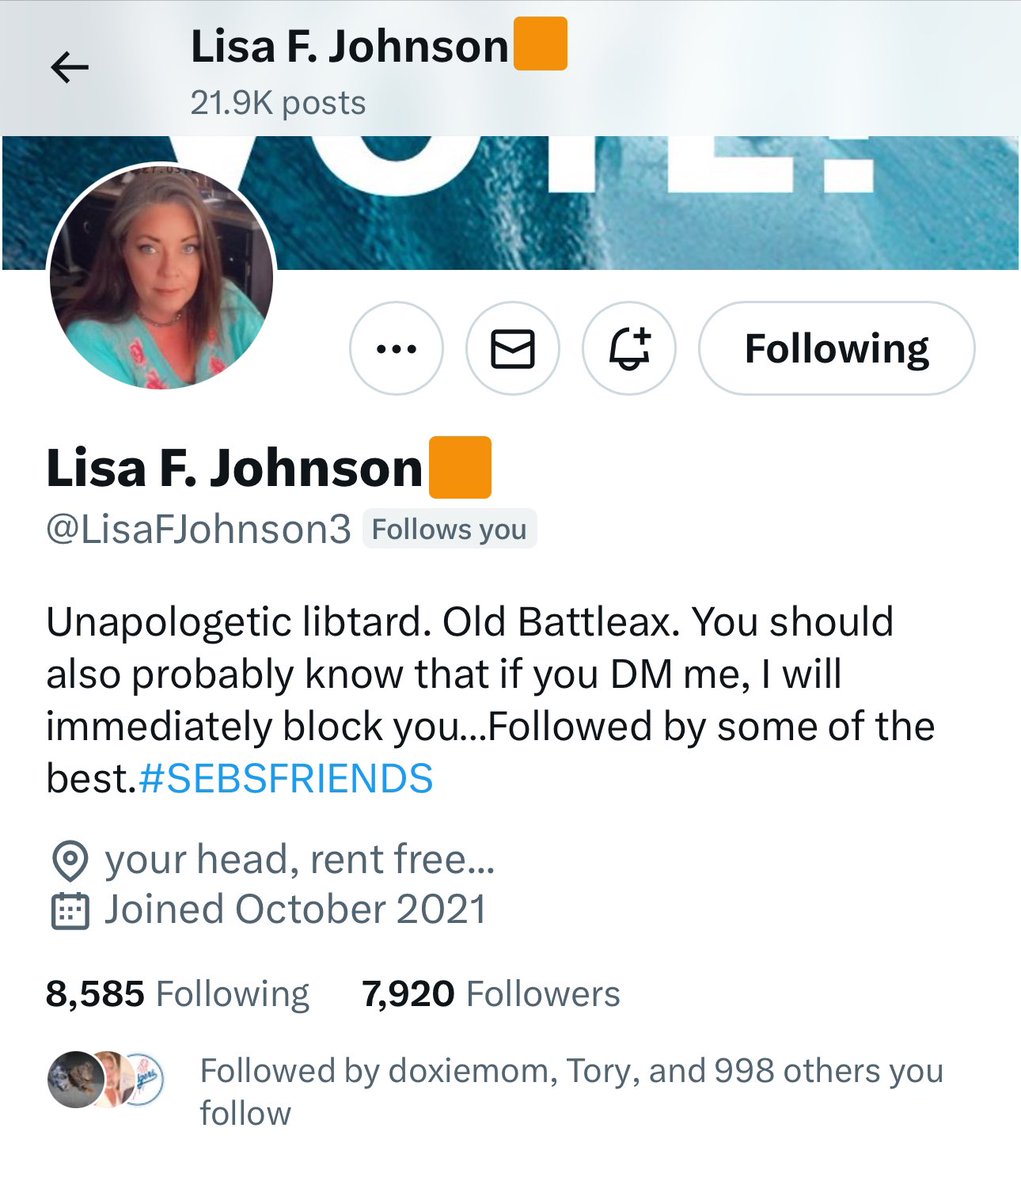 Lisa @LisaFJohnson3 only needs 80 more likeminded followers to reach 8K 💙REPOST💙